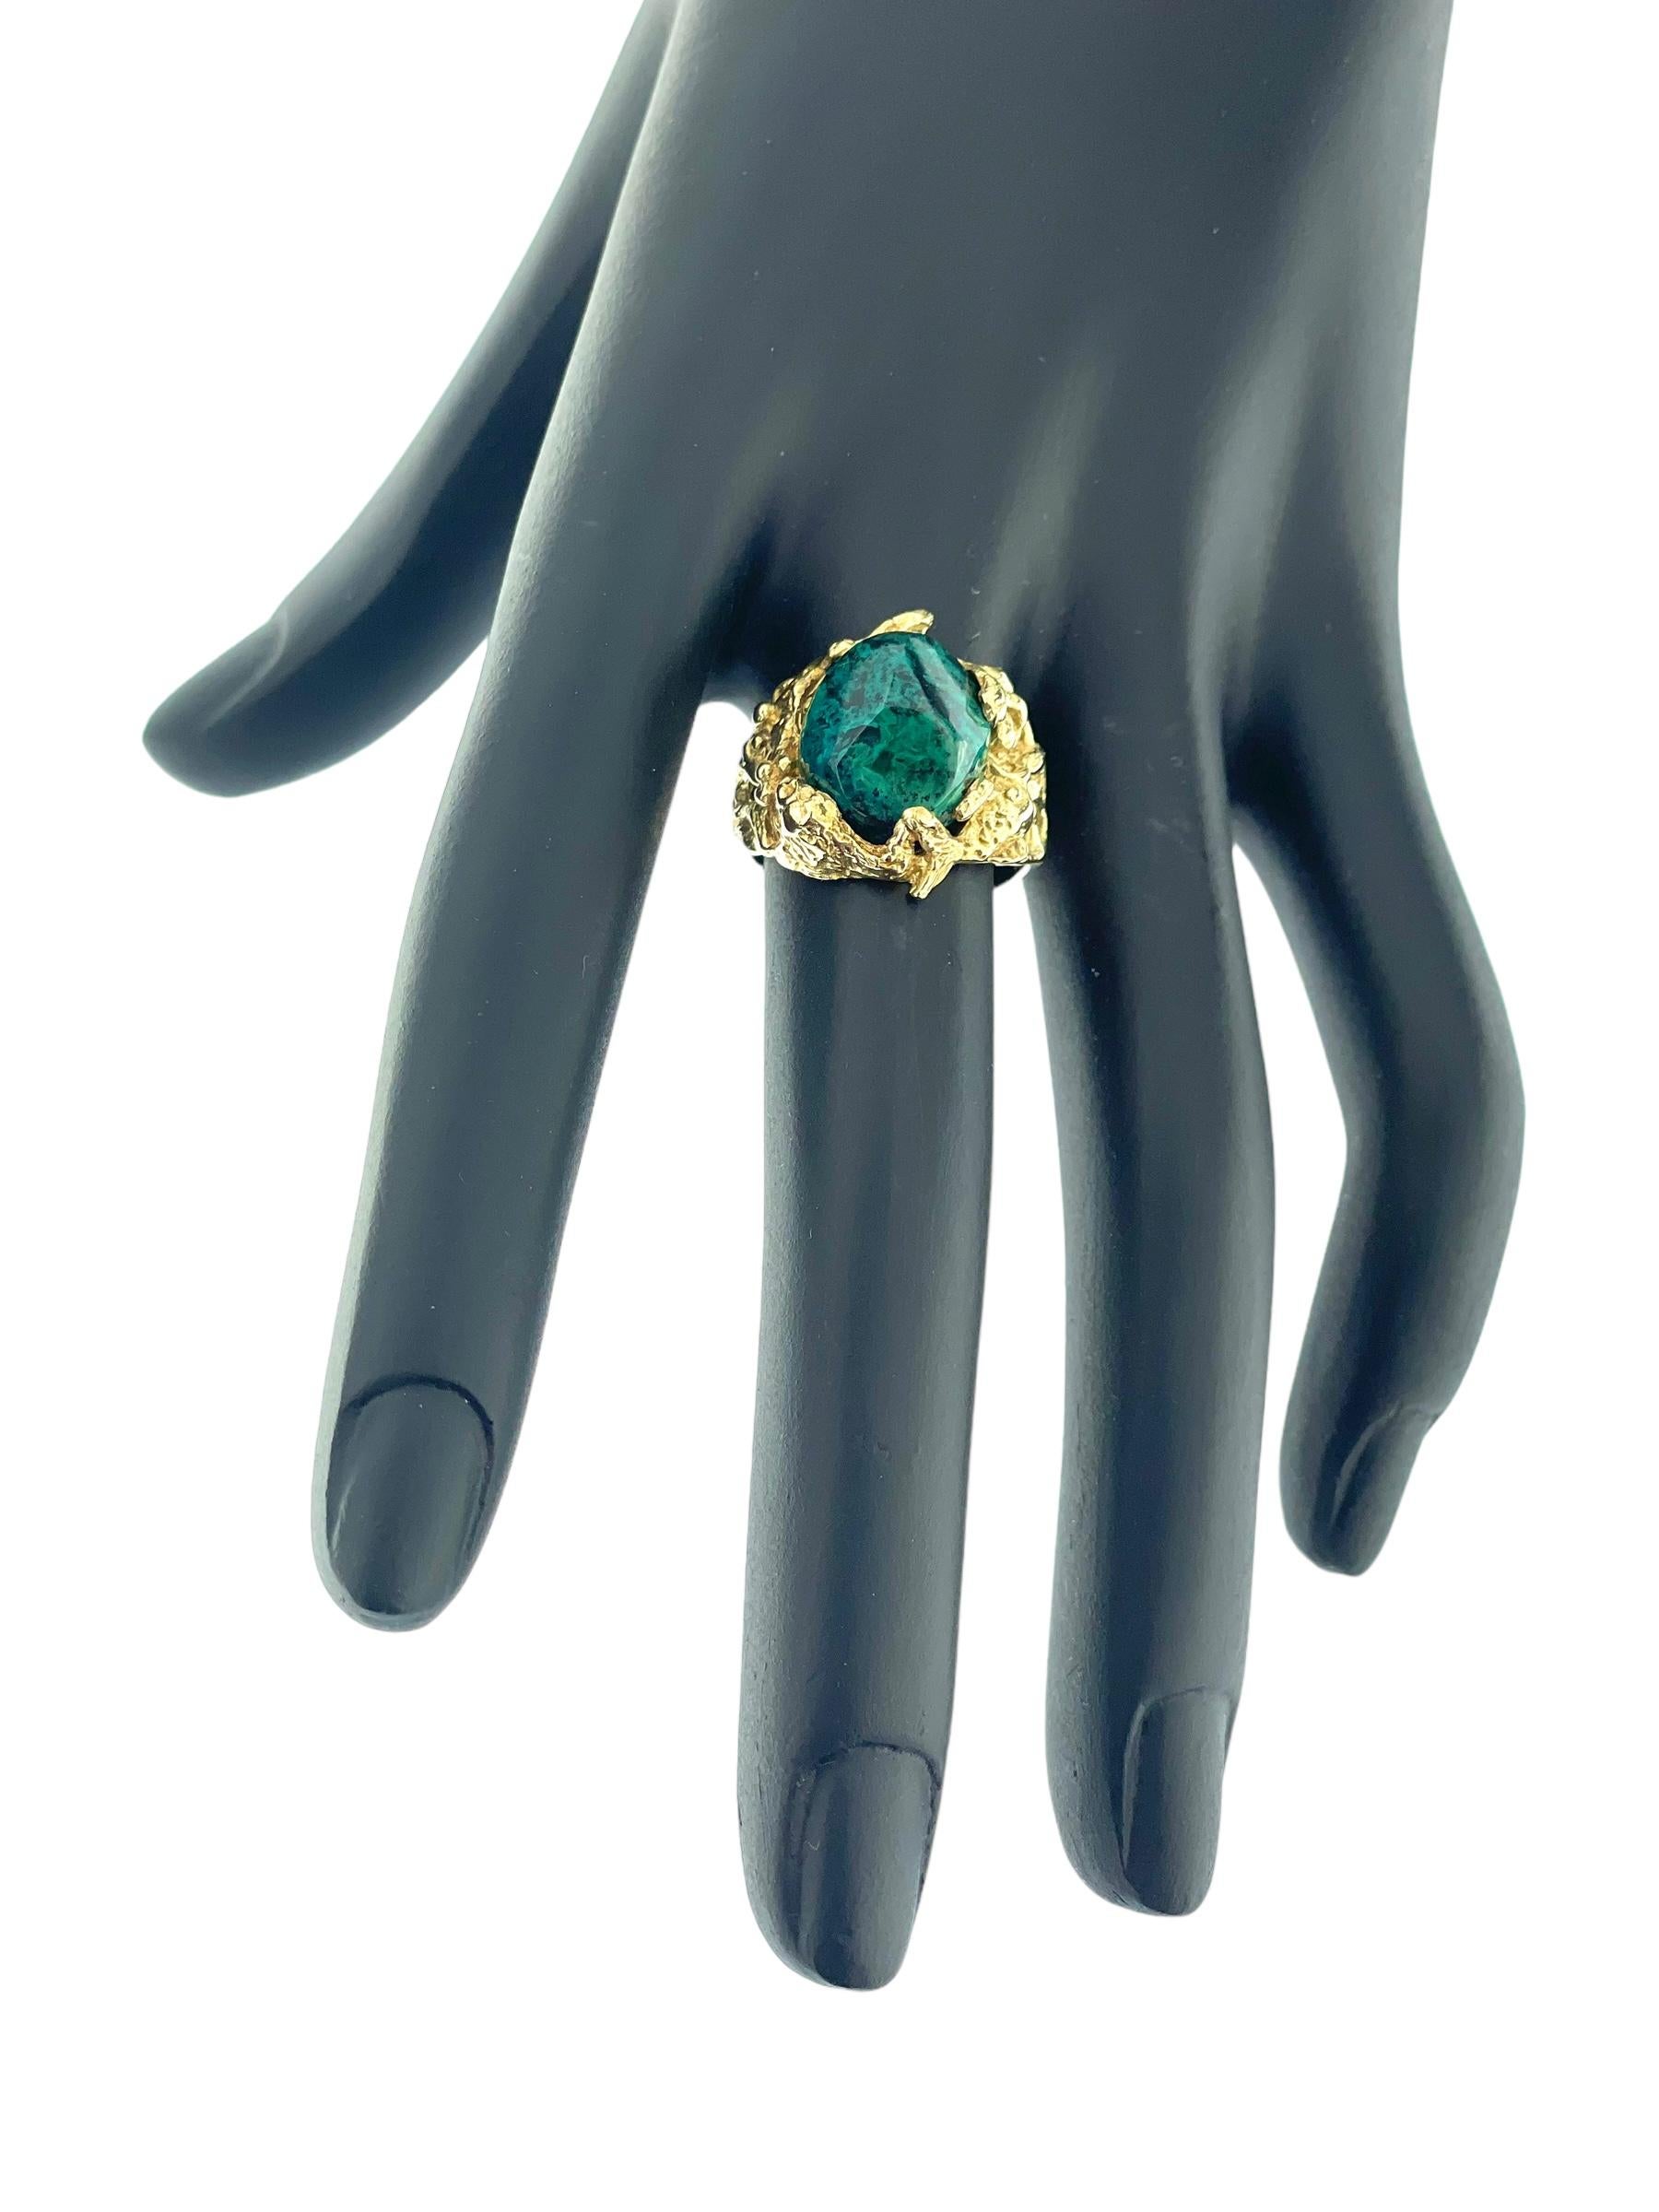 The Retro Hand-Made Cocktail Ring in Yellow Gold with Malachite, IGI Certified, is a stunning piece of jewelry that combines retro flair with modern sophistication. Crafted from 14-karat yellow gold, this ring exudes warmth and luxury, making it a